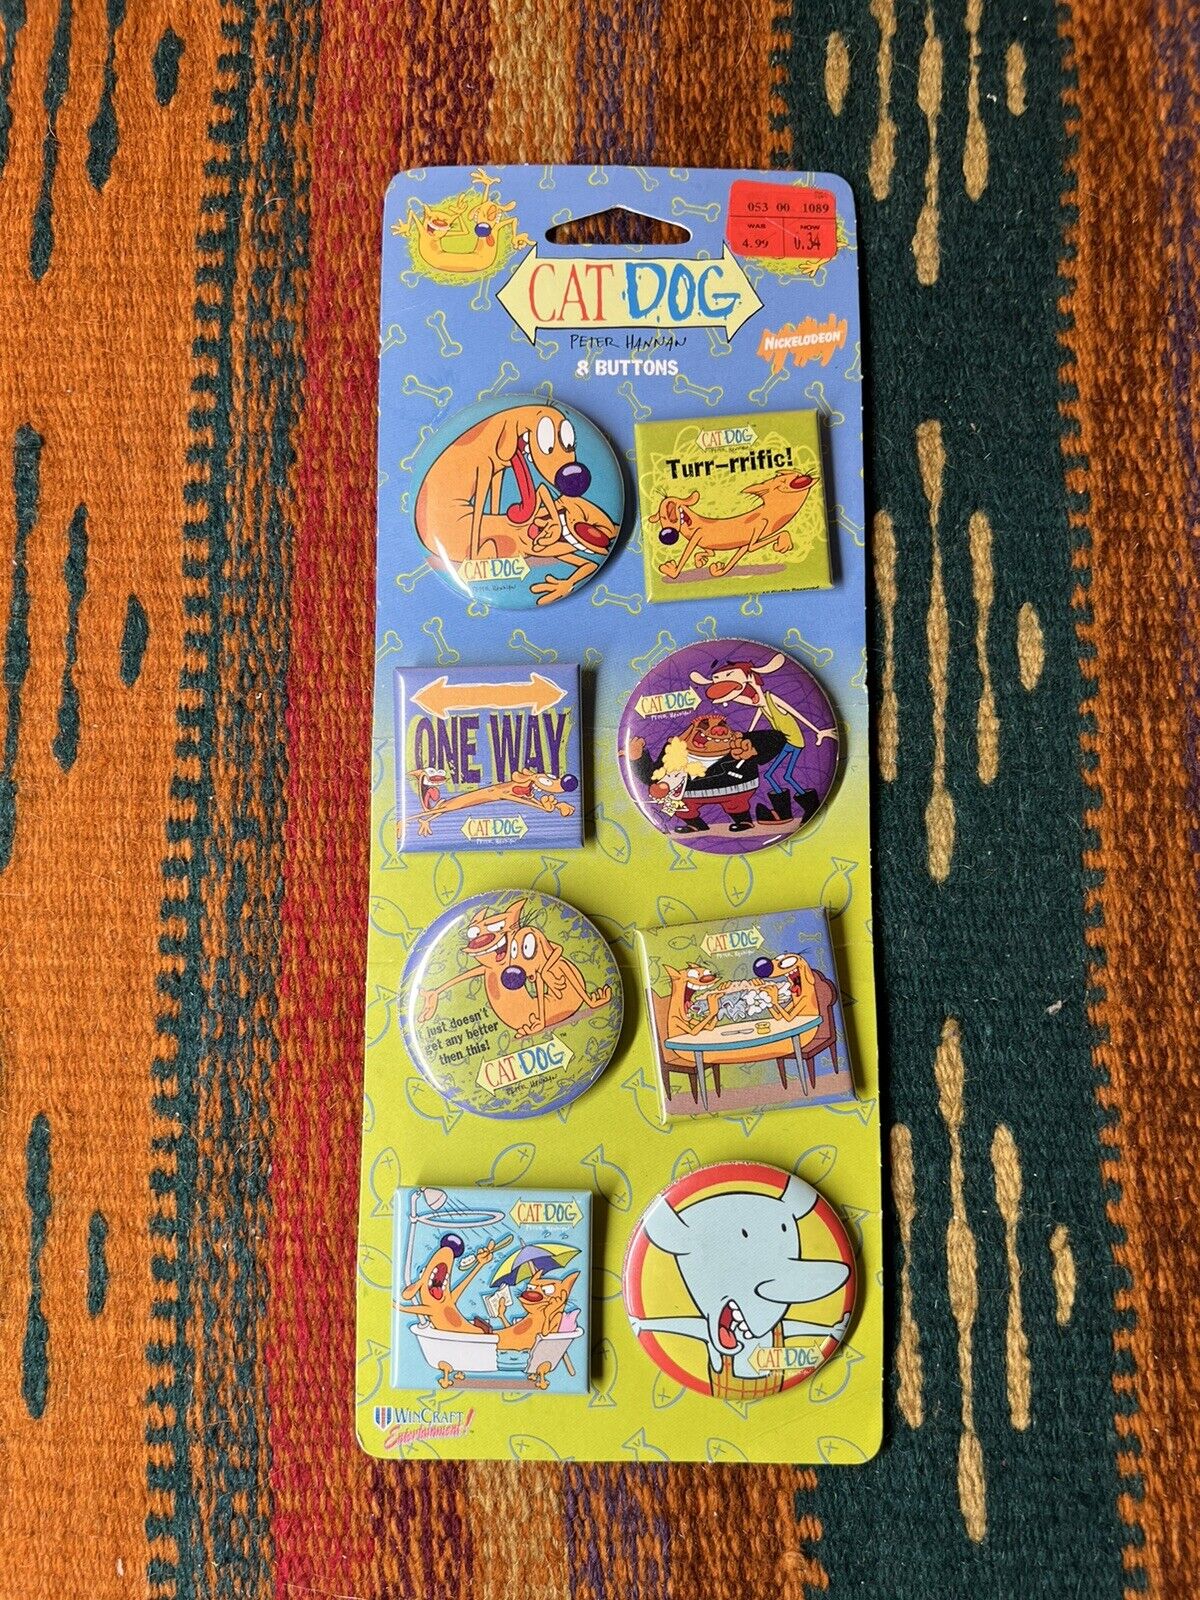 Vintage 1998 Cat Dog Nickelodeon Buttons 8 Pack Catdog